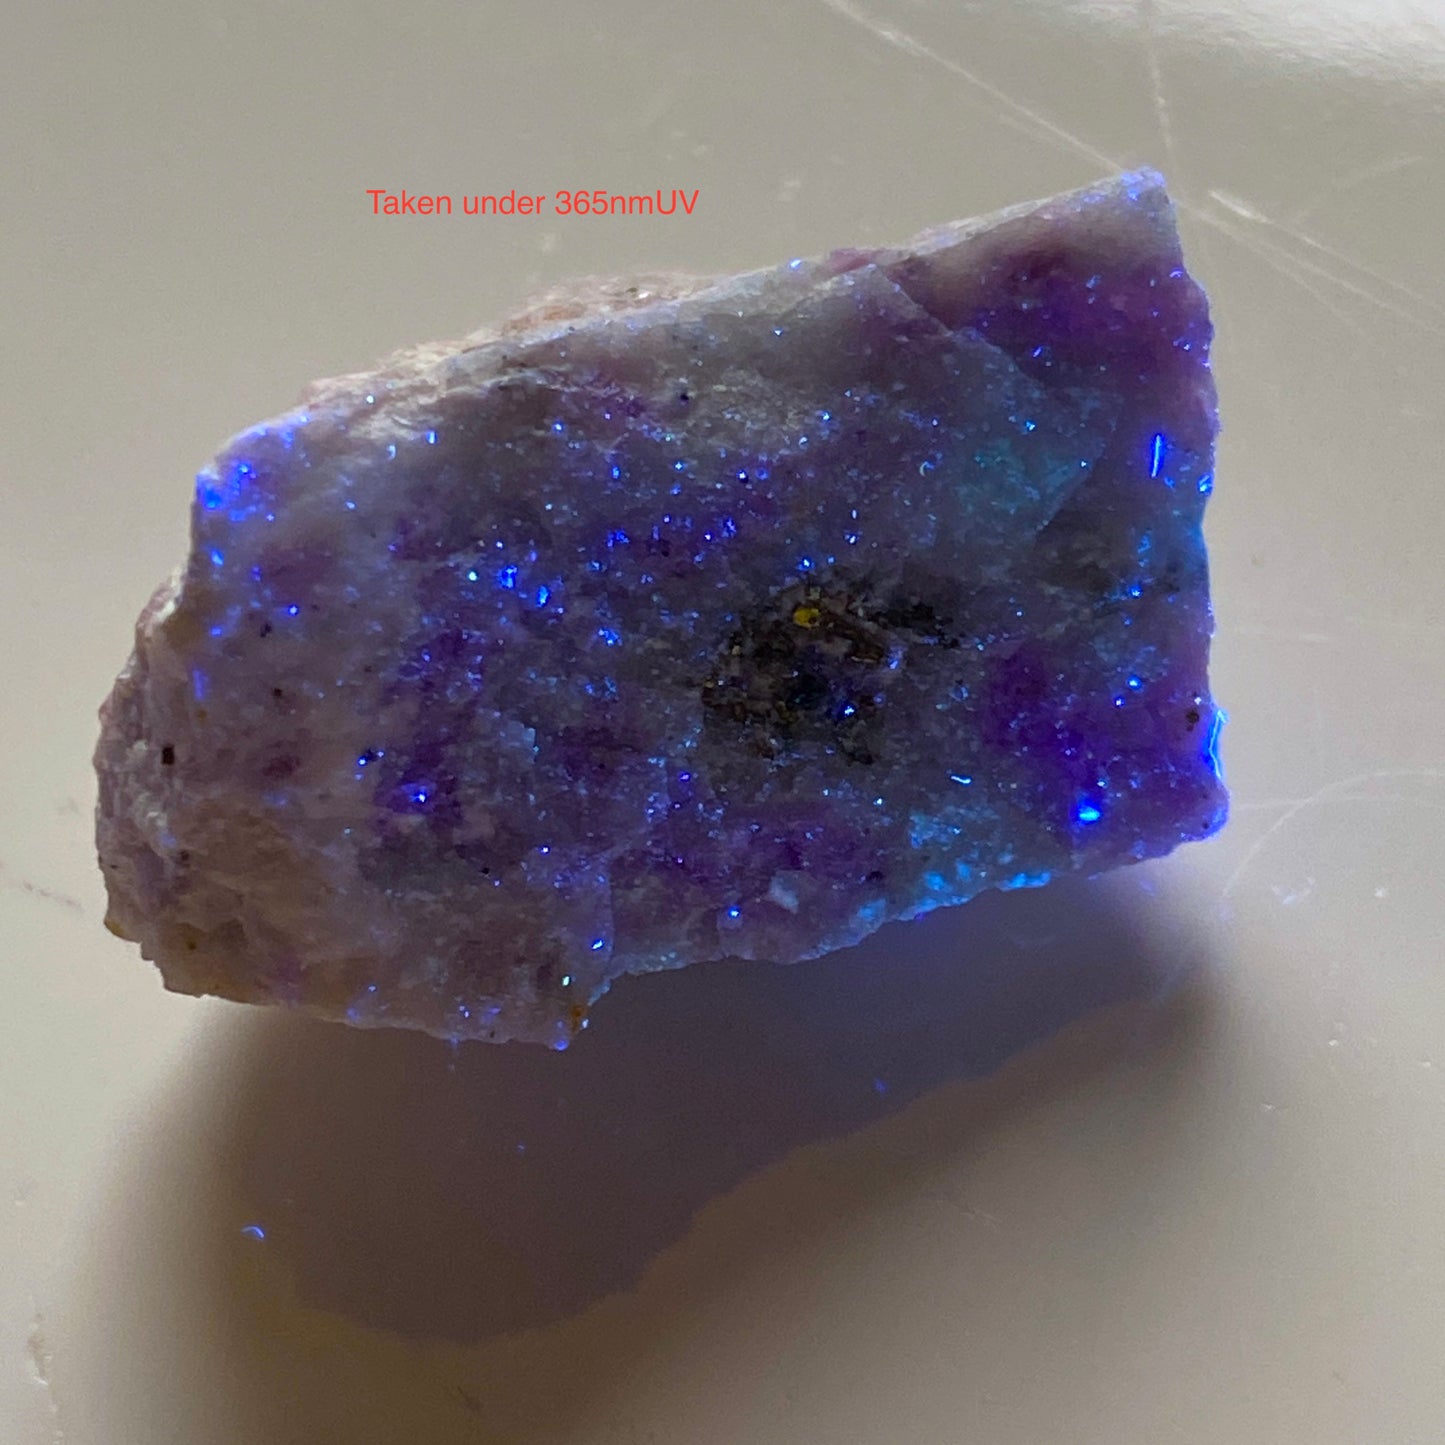 GEARKSUTITE WITH FLUORITE FROM IVIGTUT, GREENLAND. 8g MF1769